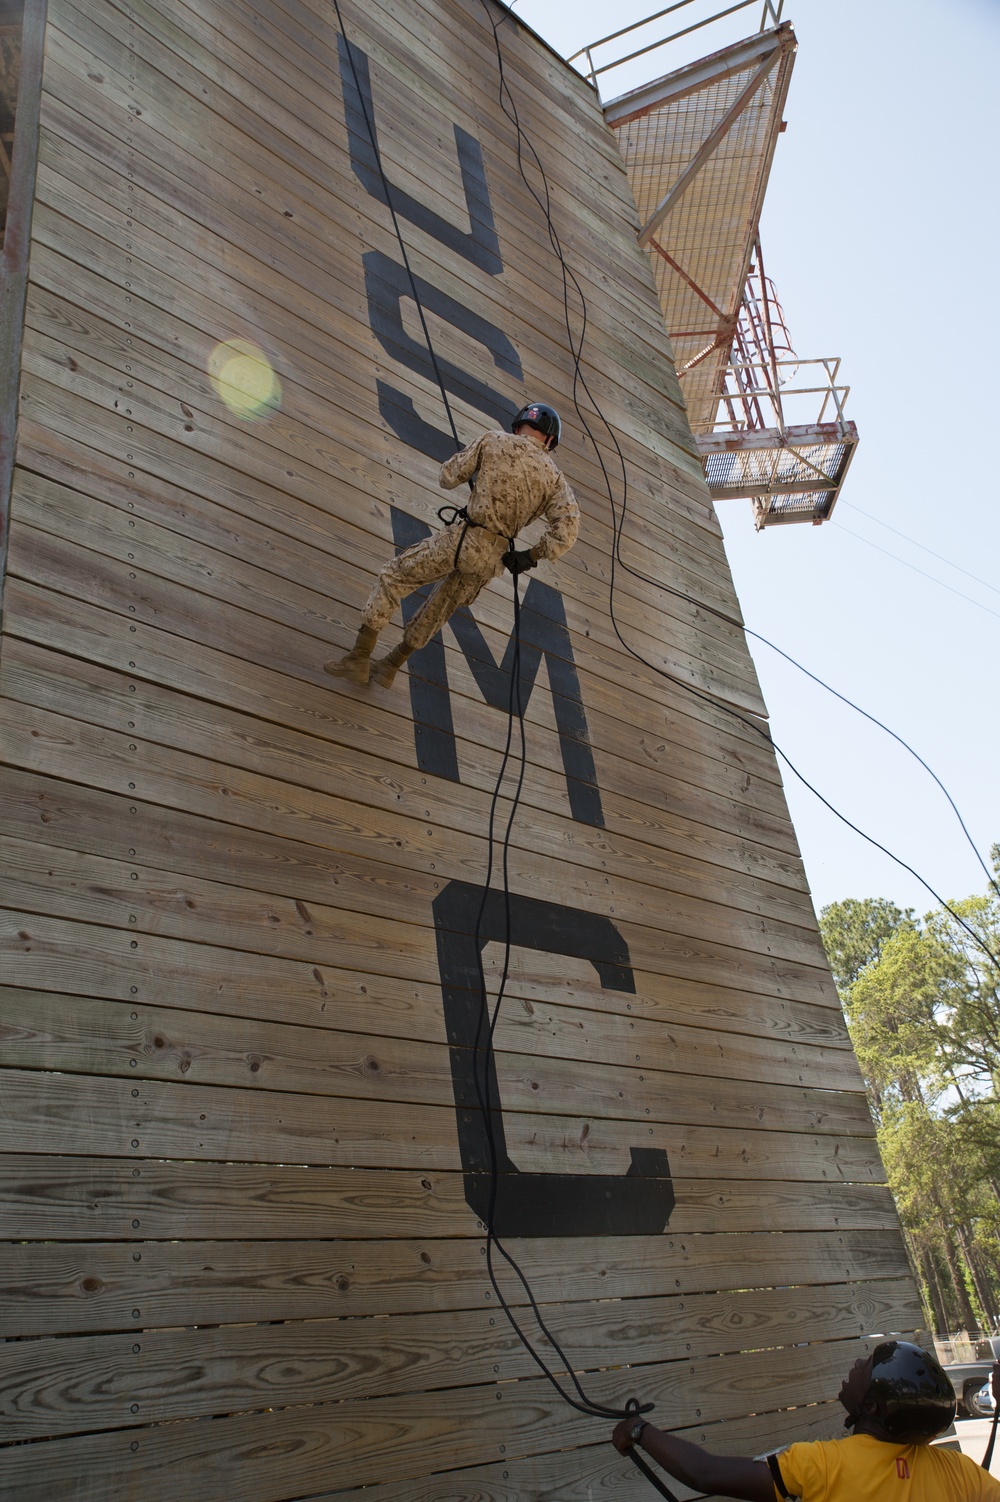 Photo Gallery: Marine recruits learn to rappel on Parris Island